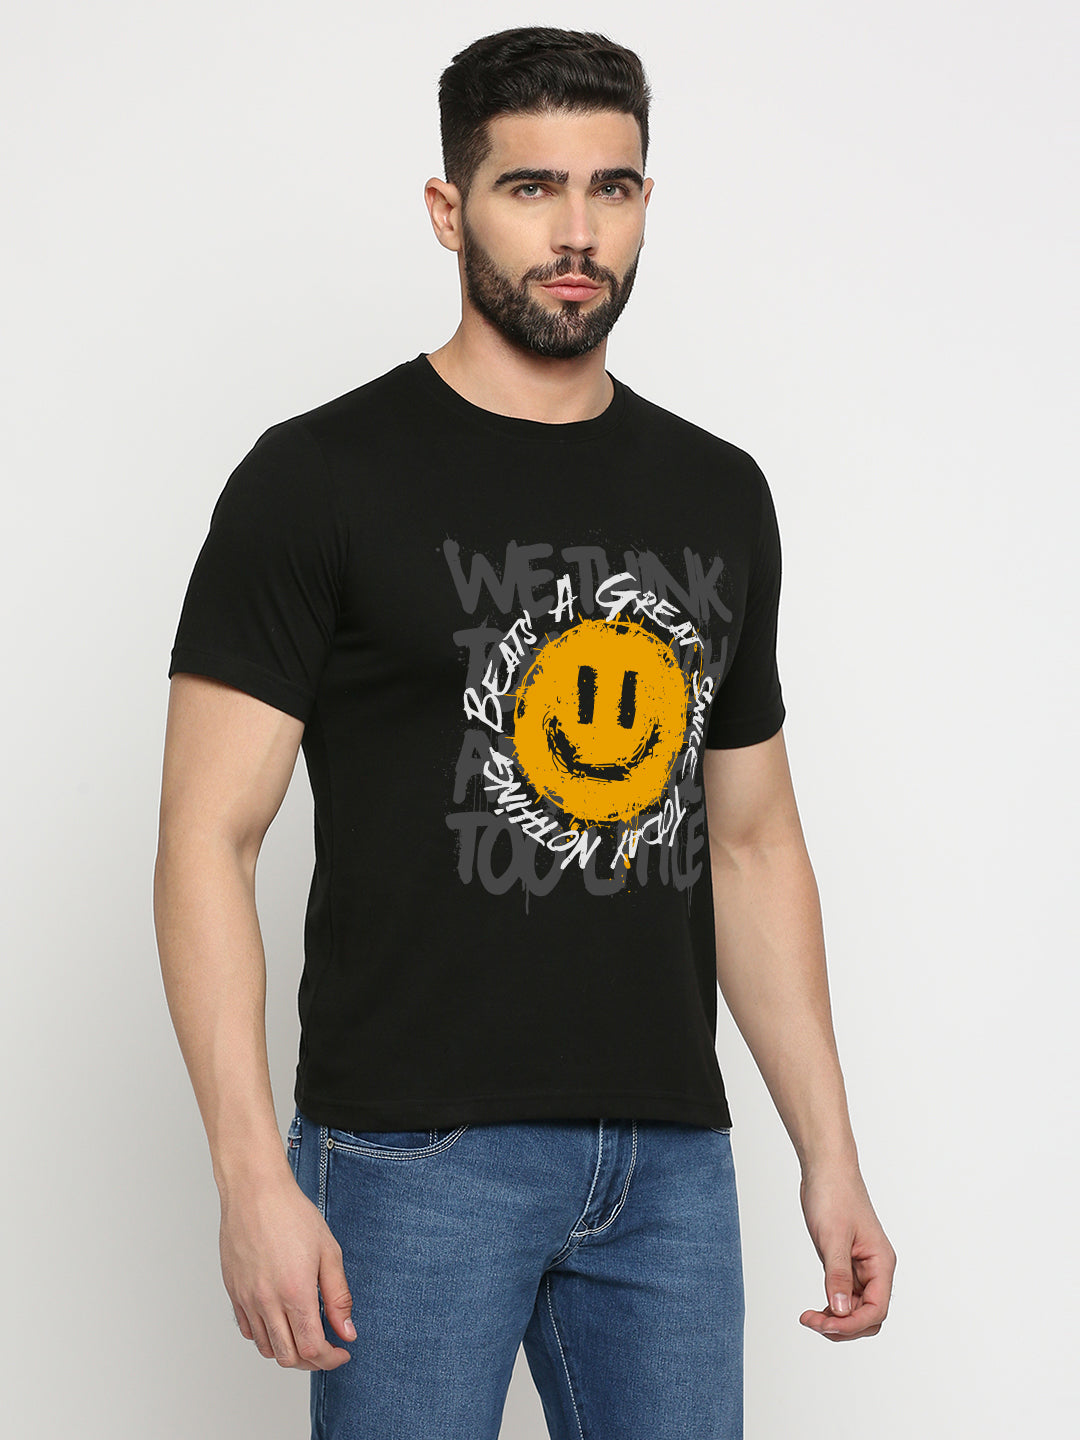 Nothing Beats A Good Smile Today T-Shirt